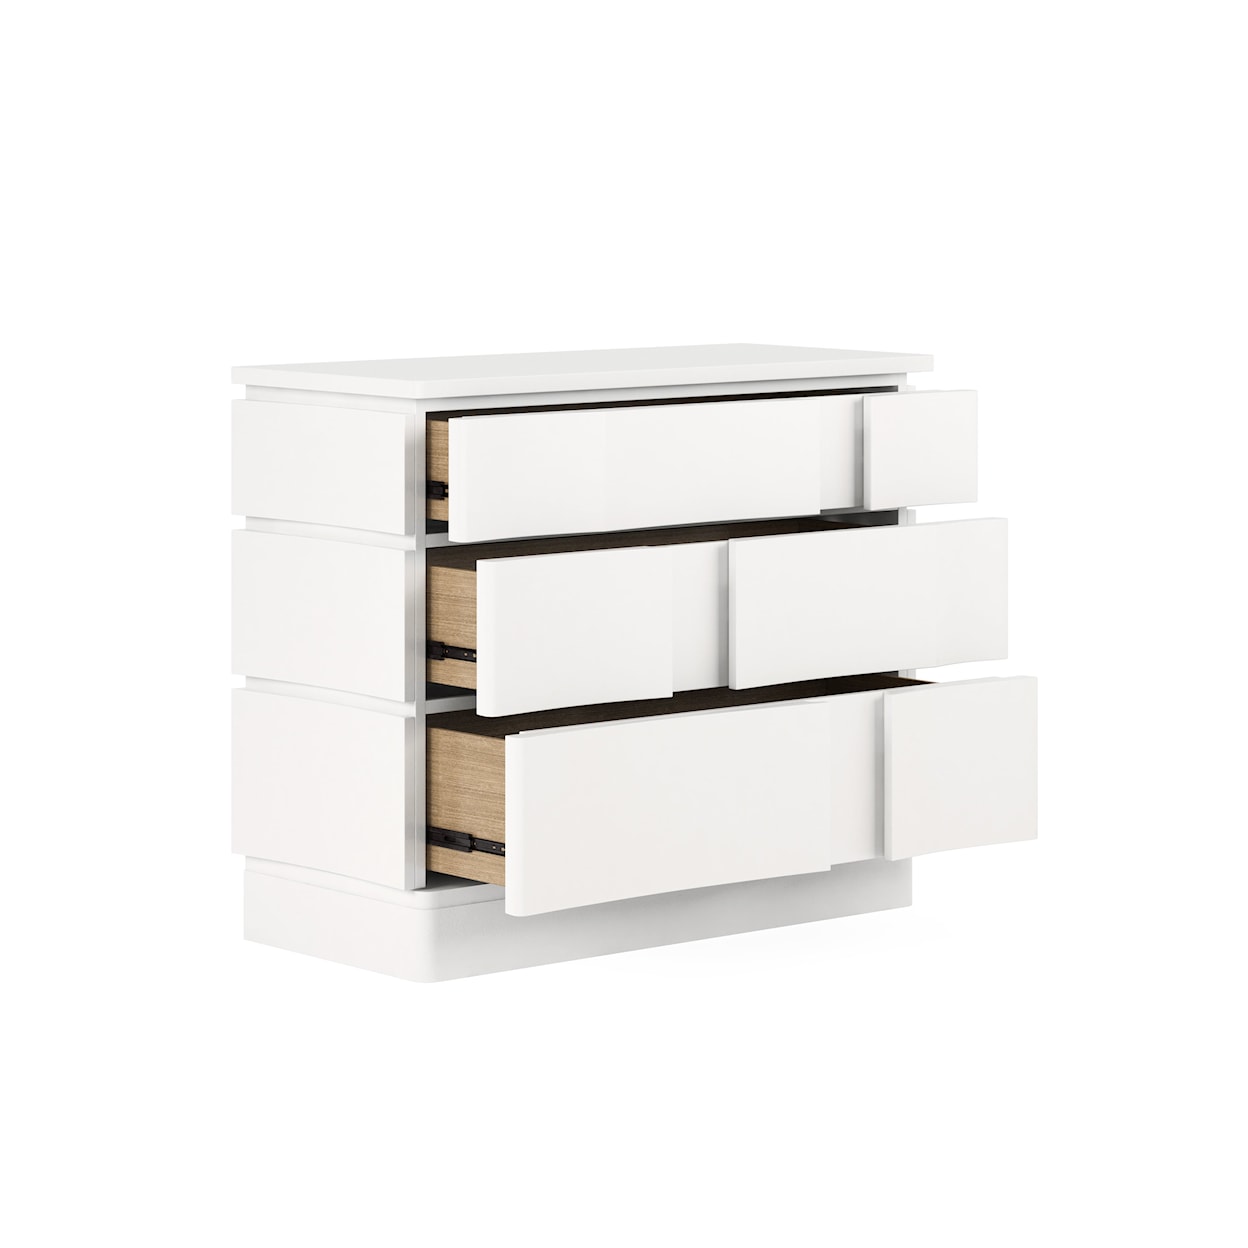 A.R.T. Furniture Inc Portico White Plaster 3-Drawer Bedroom Accent Chest